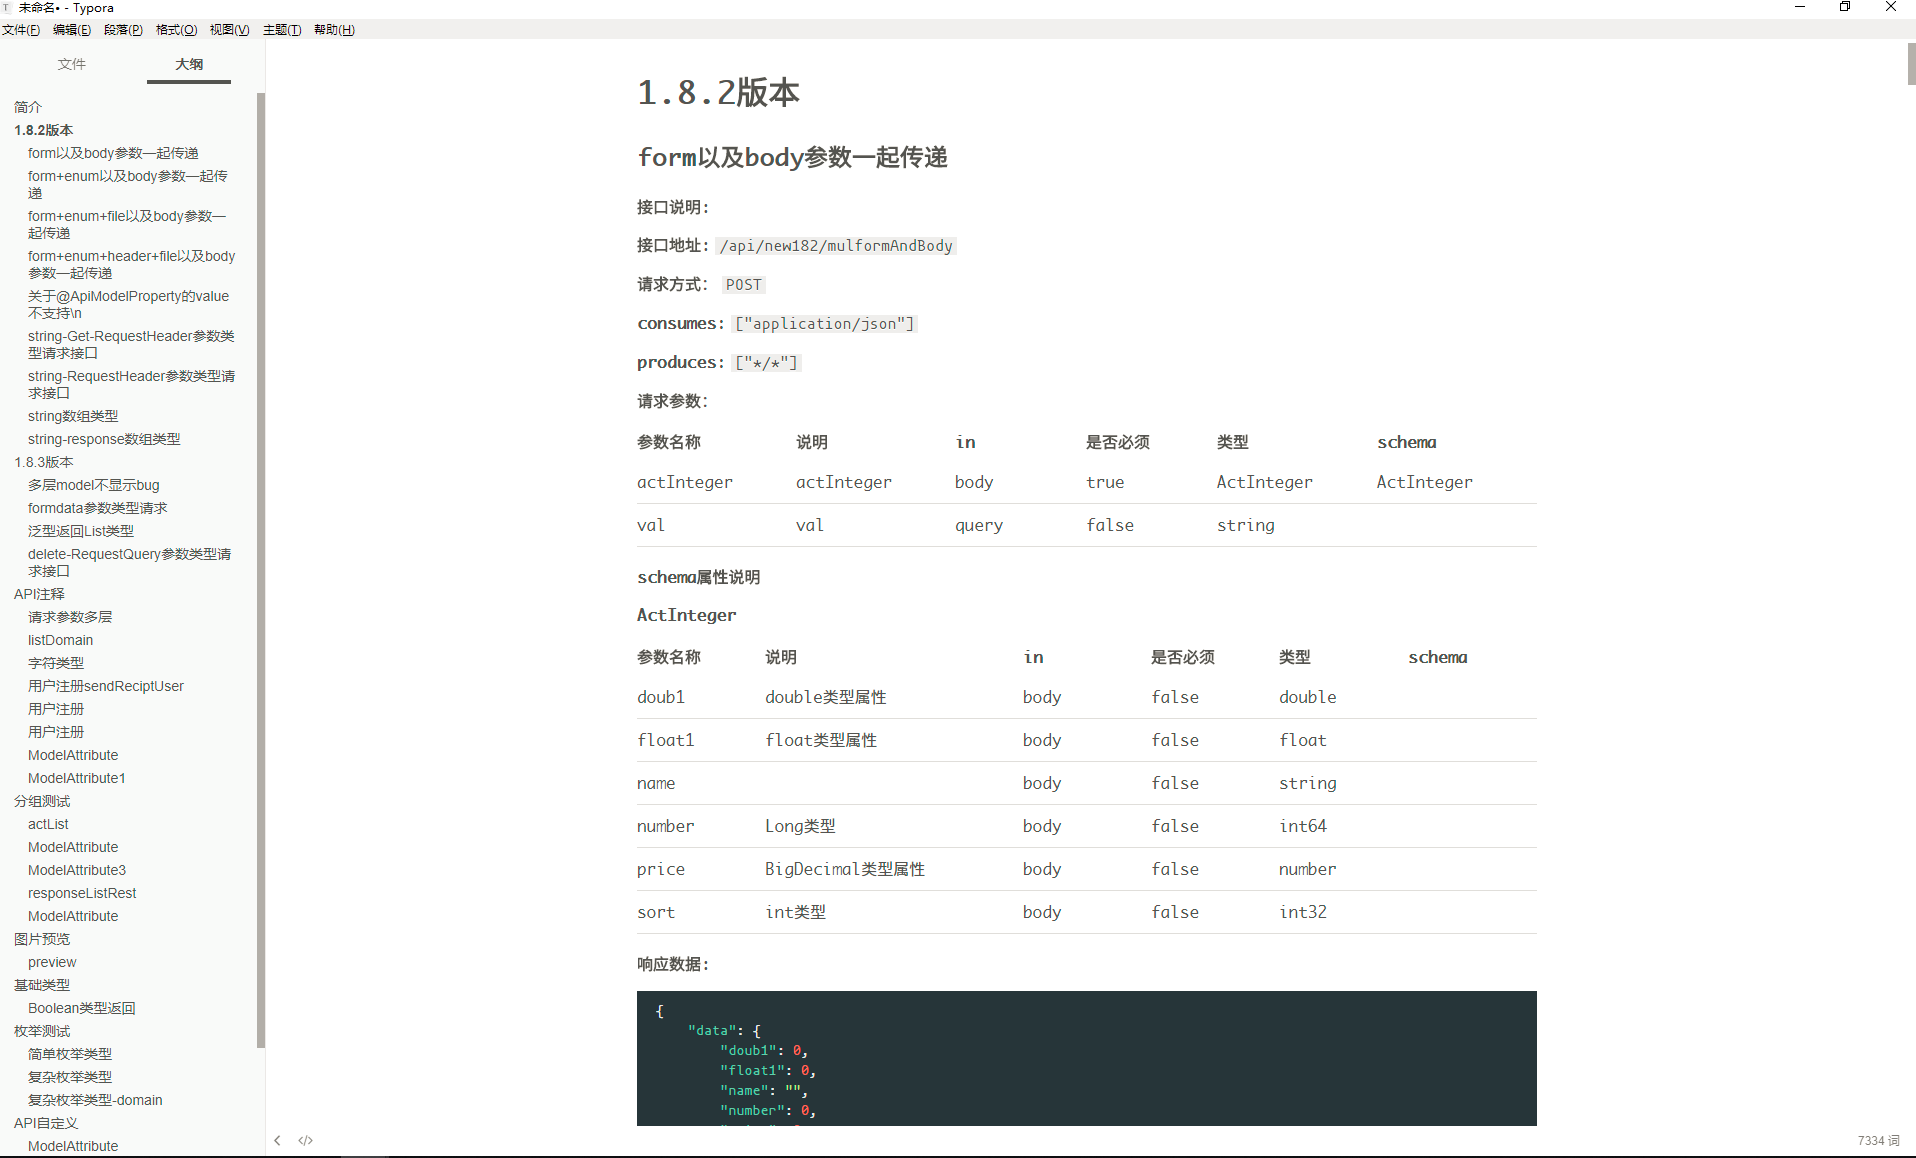 swagger-bootstrap-ui 1.8.3 发布，Swagger前端 UI 实现